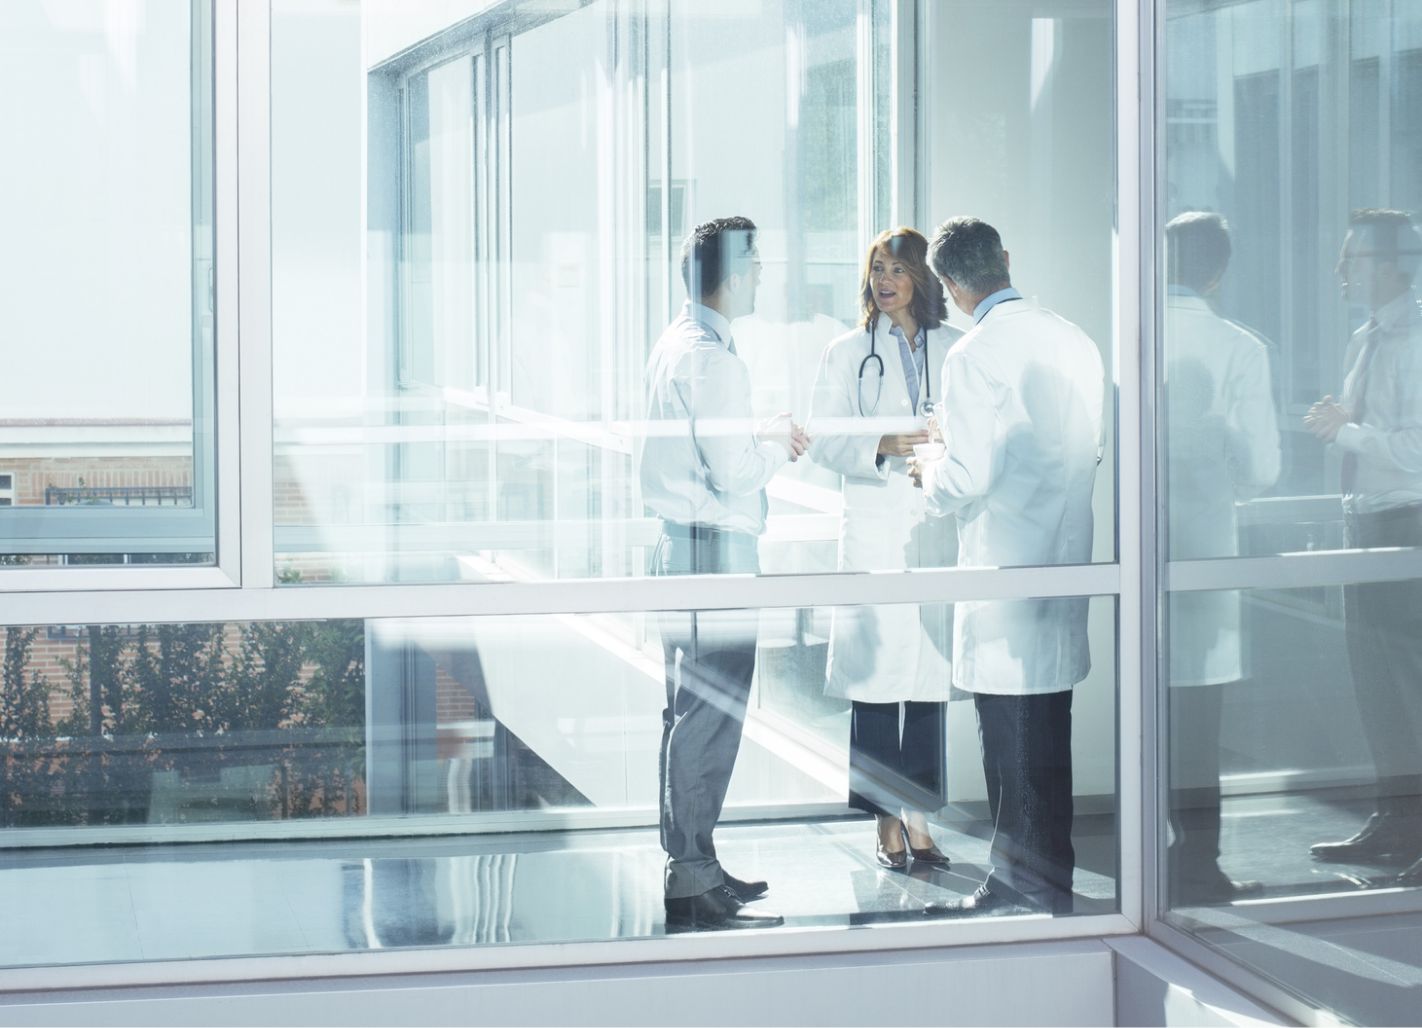 Doctors speaking with and administrator behind a glass windowed walkway.